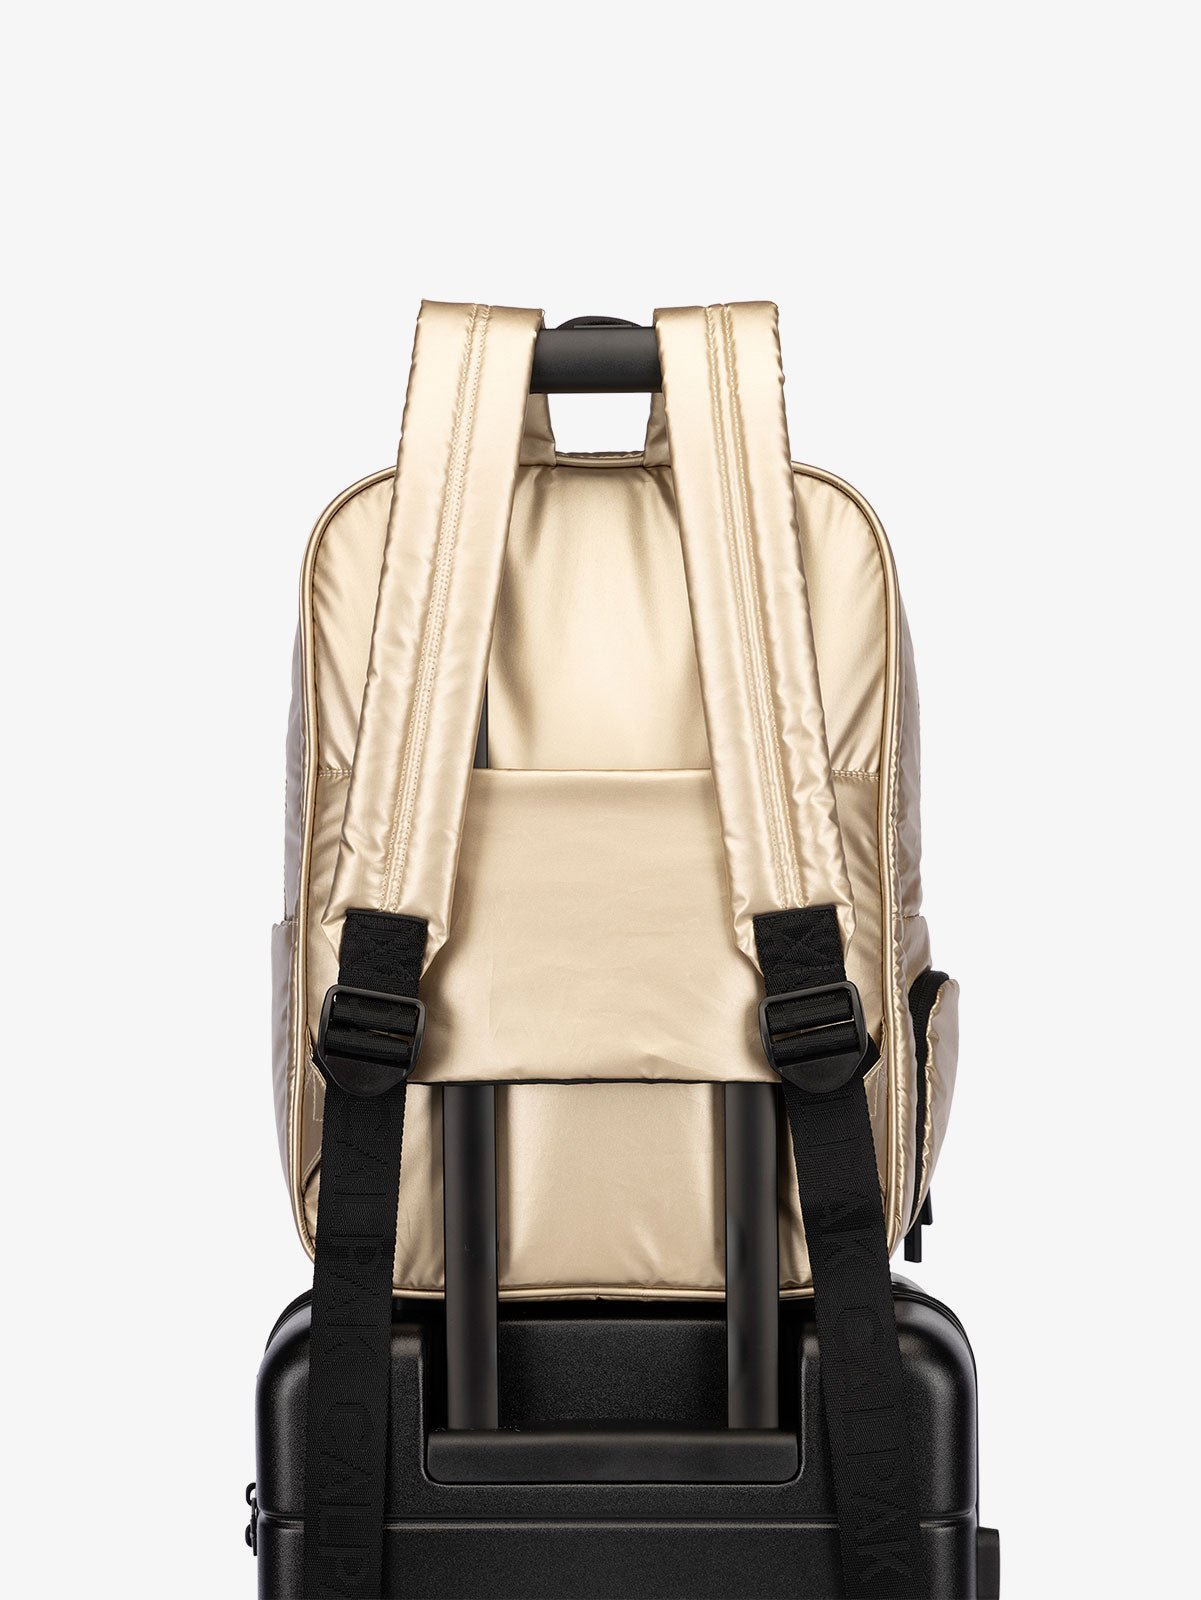 CALPAK water resistant Luka Laptop Backpack with adjustable shoulder straps and trolley sleeve in metallic gold